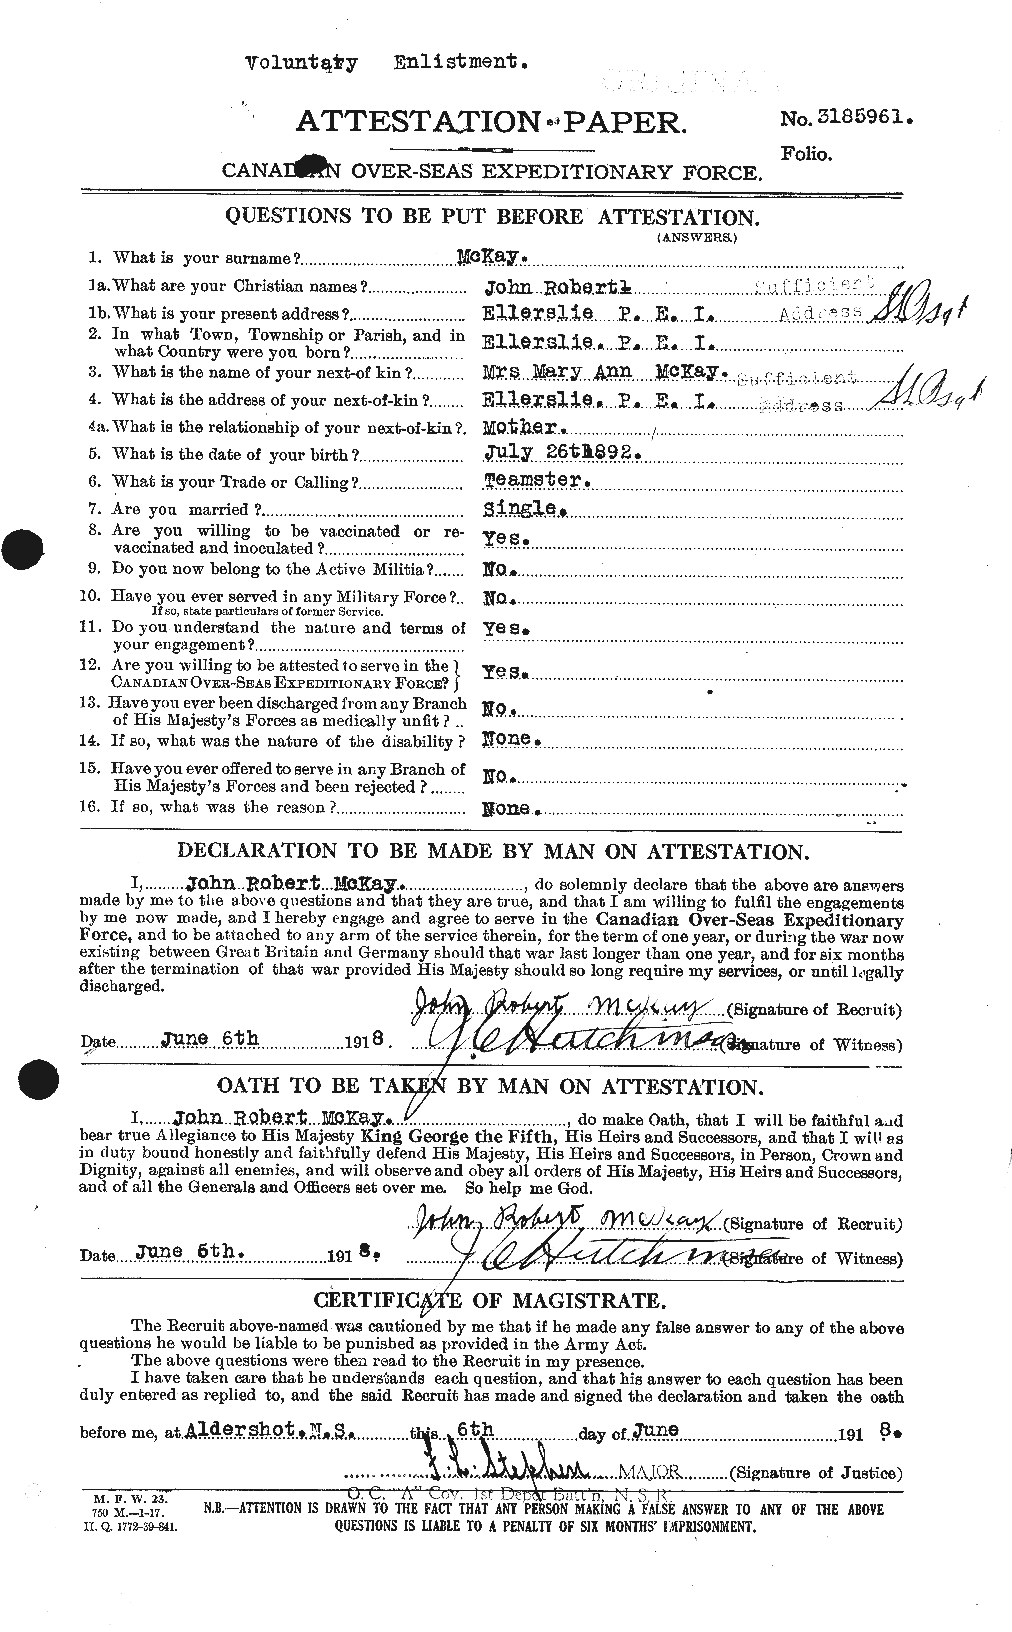 Personnel Records of the First World War - CEF 527089a